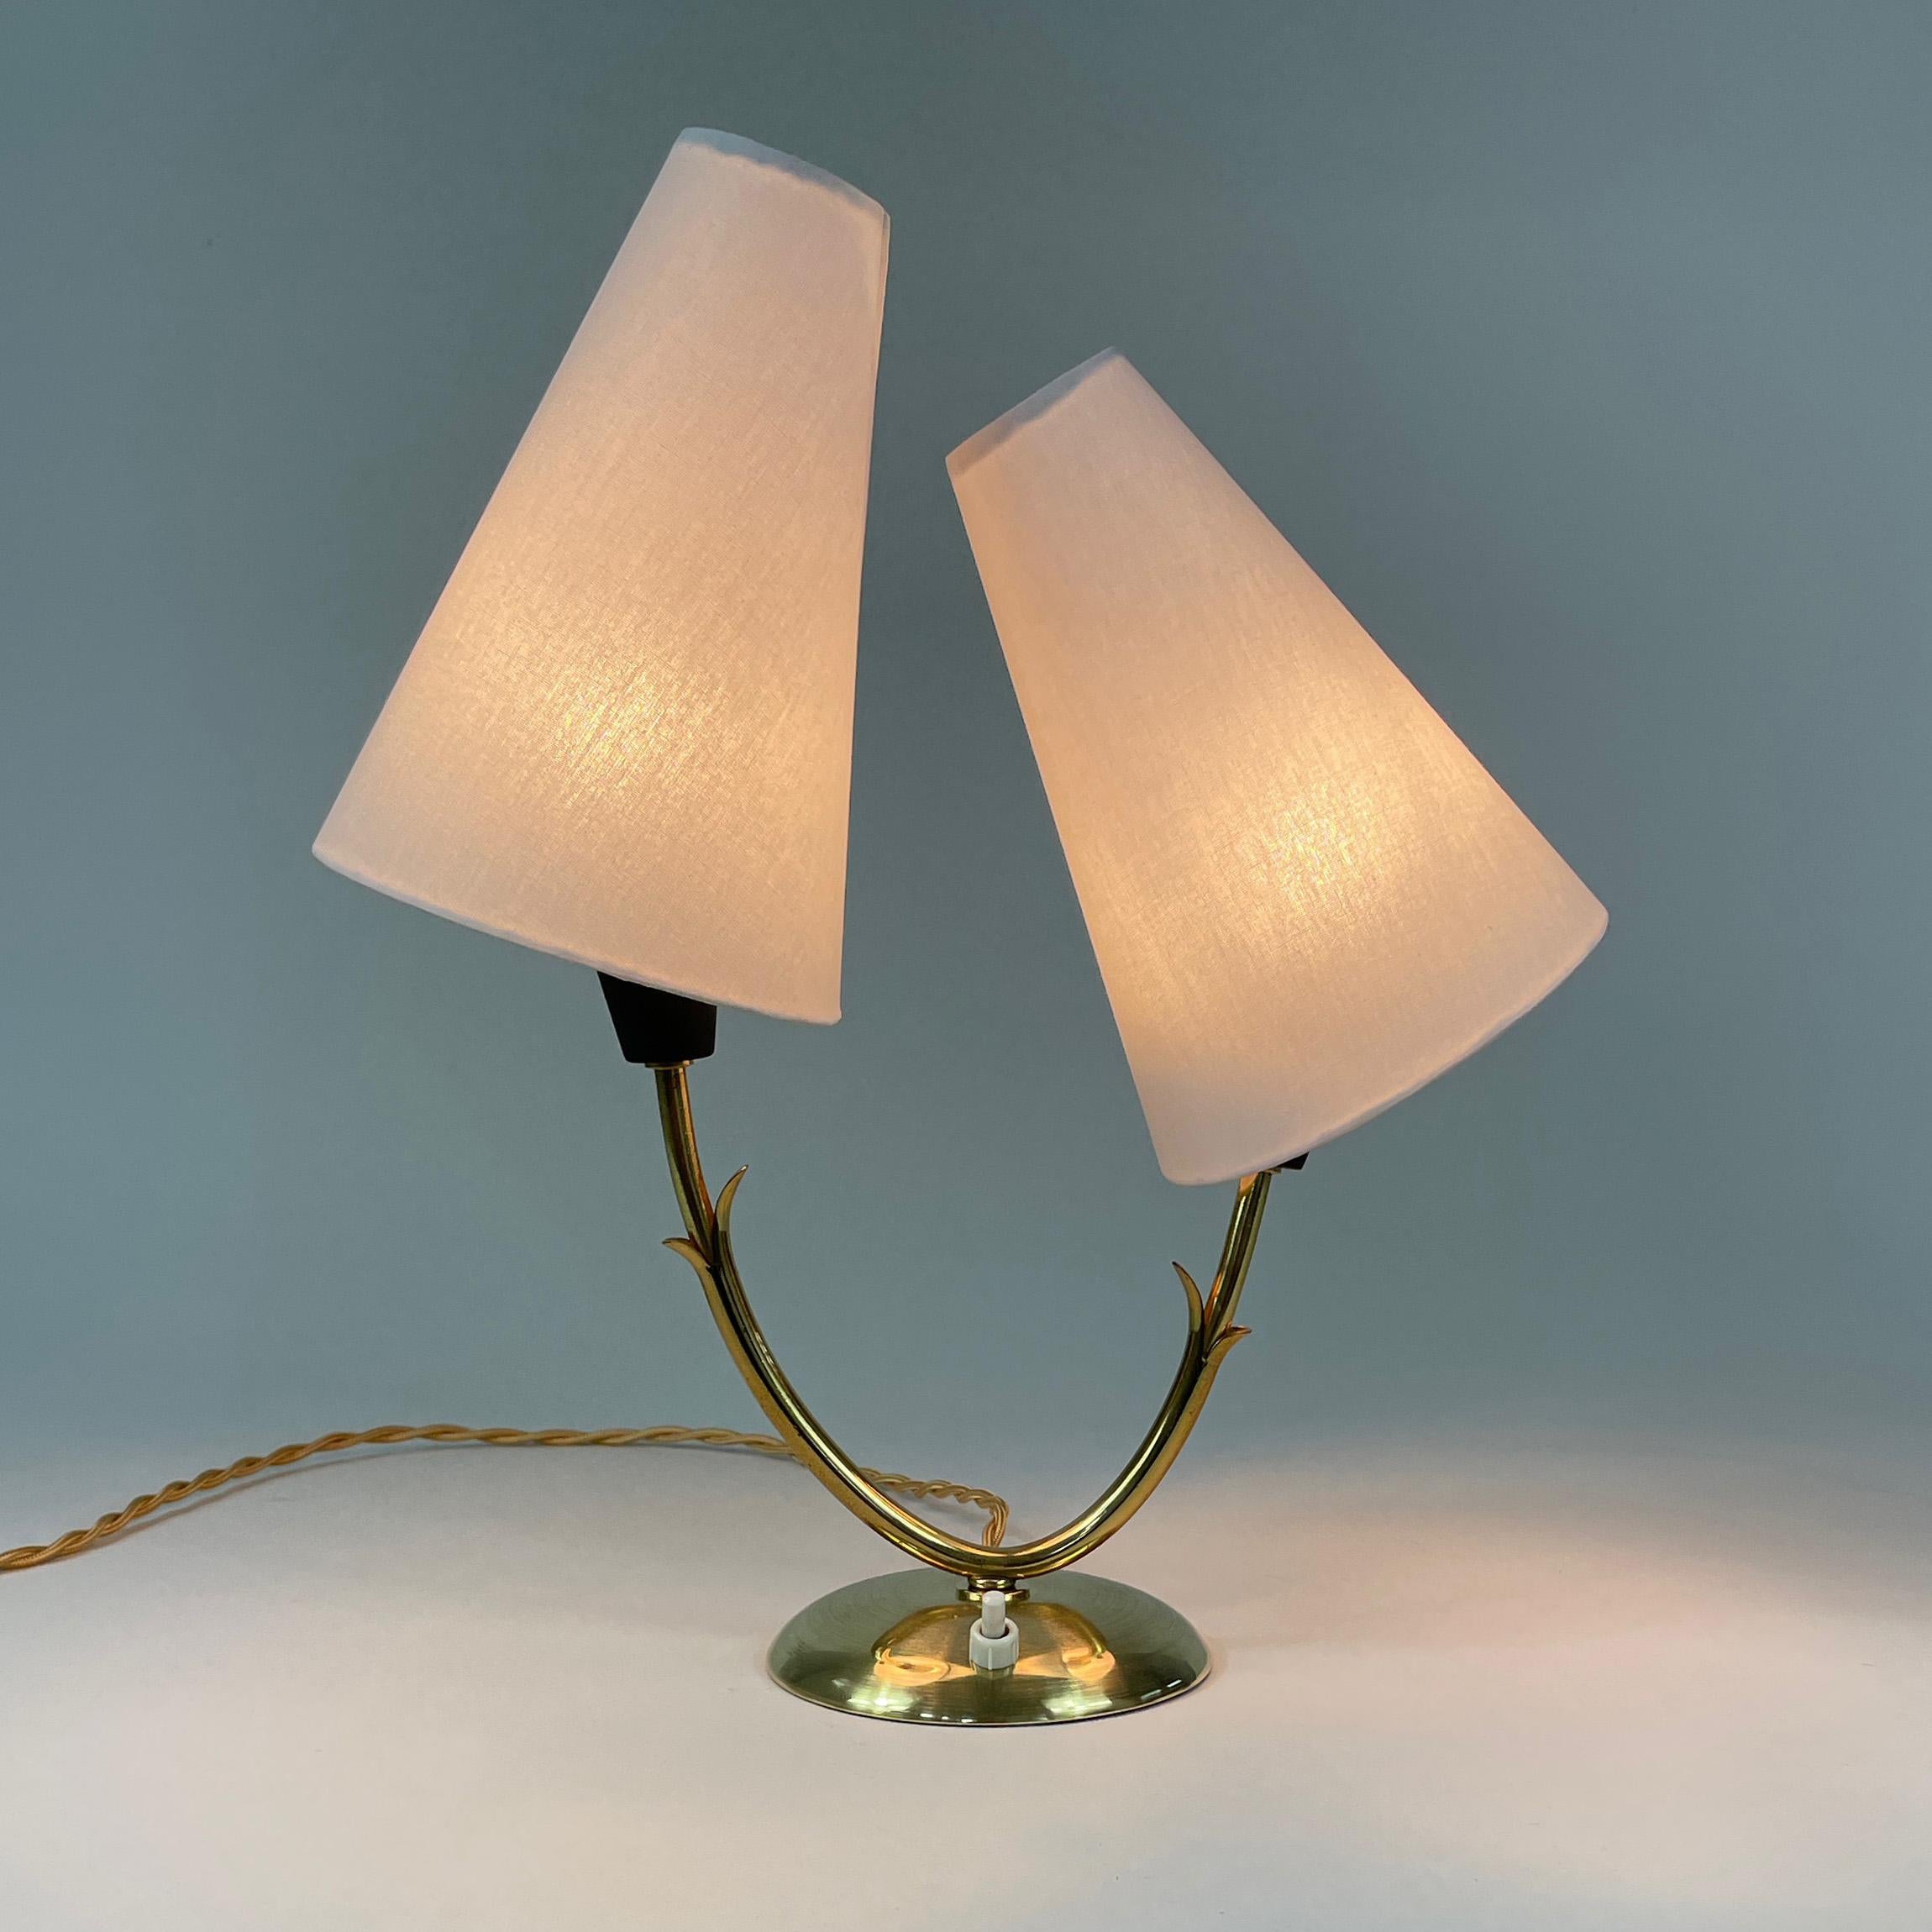 Double Arm Brass Table Lamp, Sweden 1950s For Sale 4